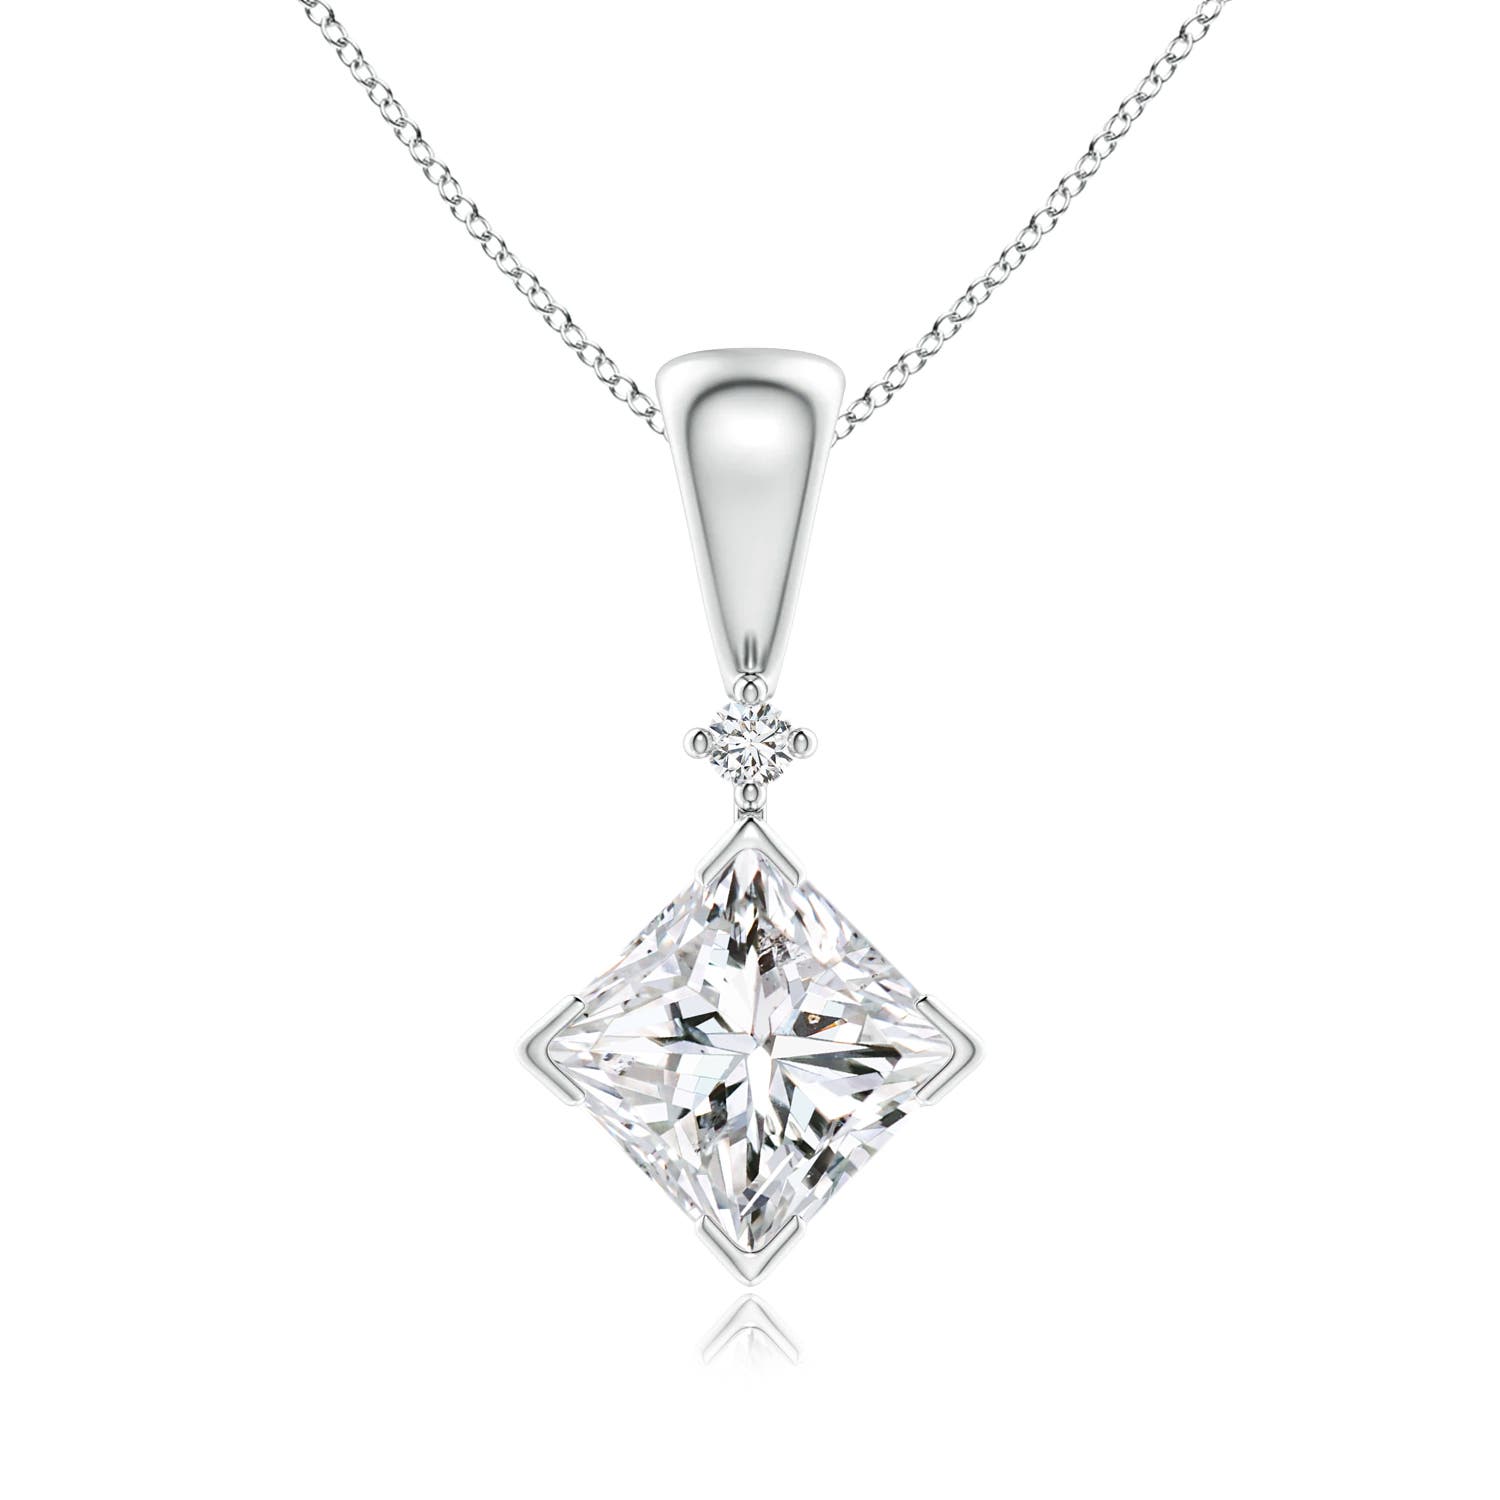 H, SI2 / 1.06 CT / 14 KT White Gold